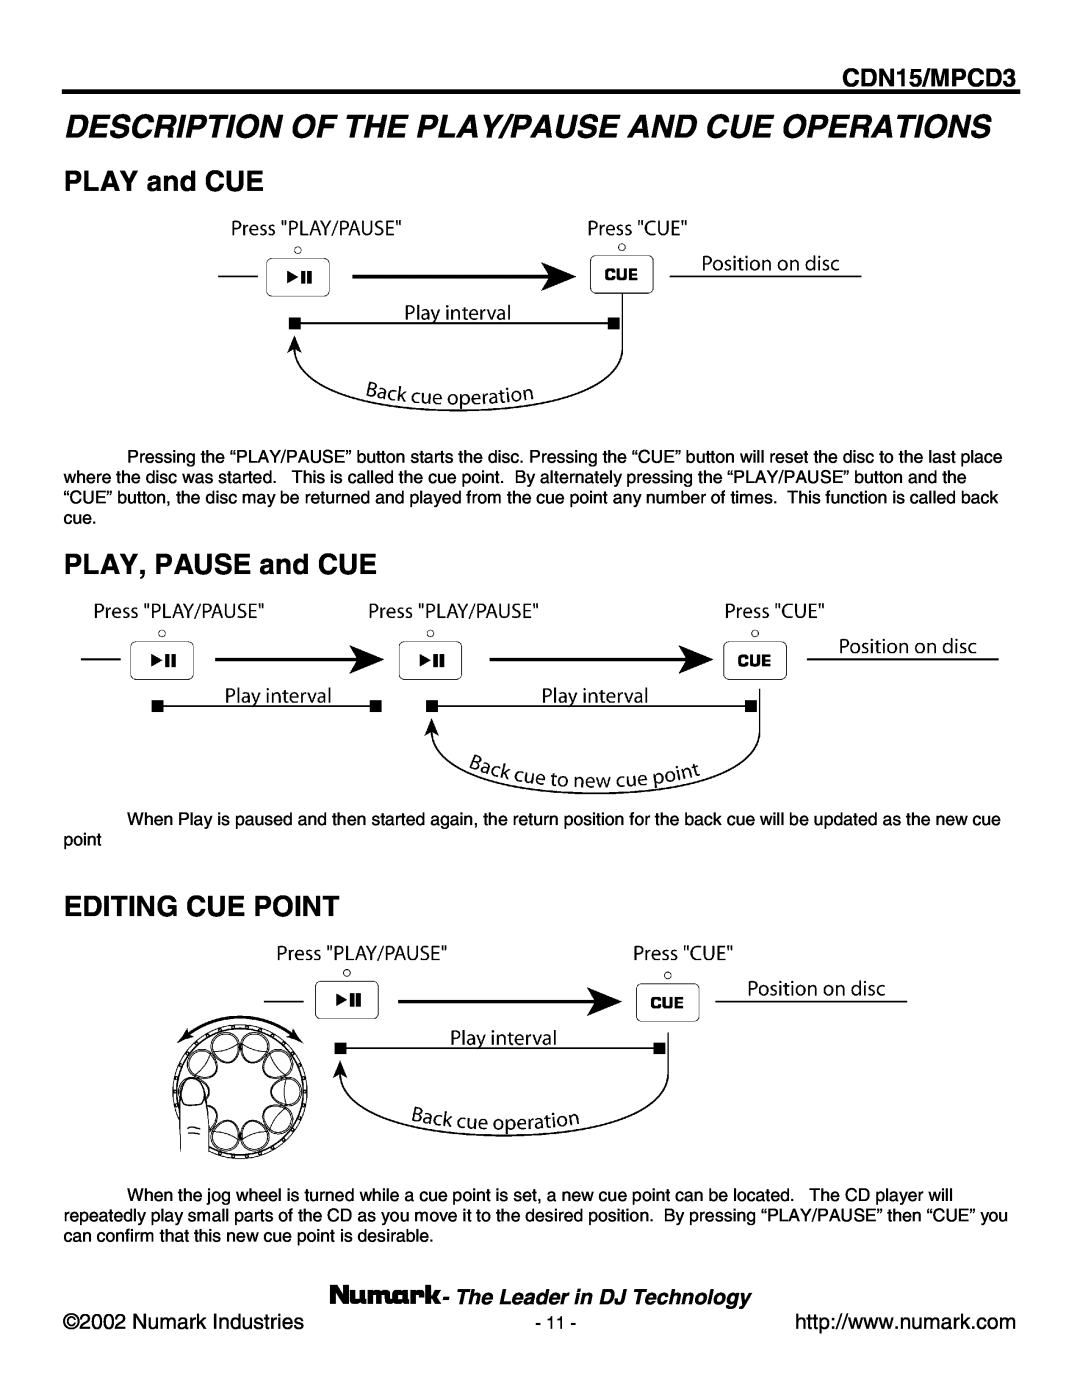 Numark Industries CDN15, MPCD3 Description Of The Play/Pause And Cue Operations, PLAY and CUE, PLAY, PAUSE and CUE 